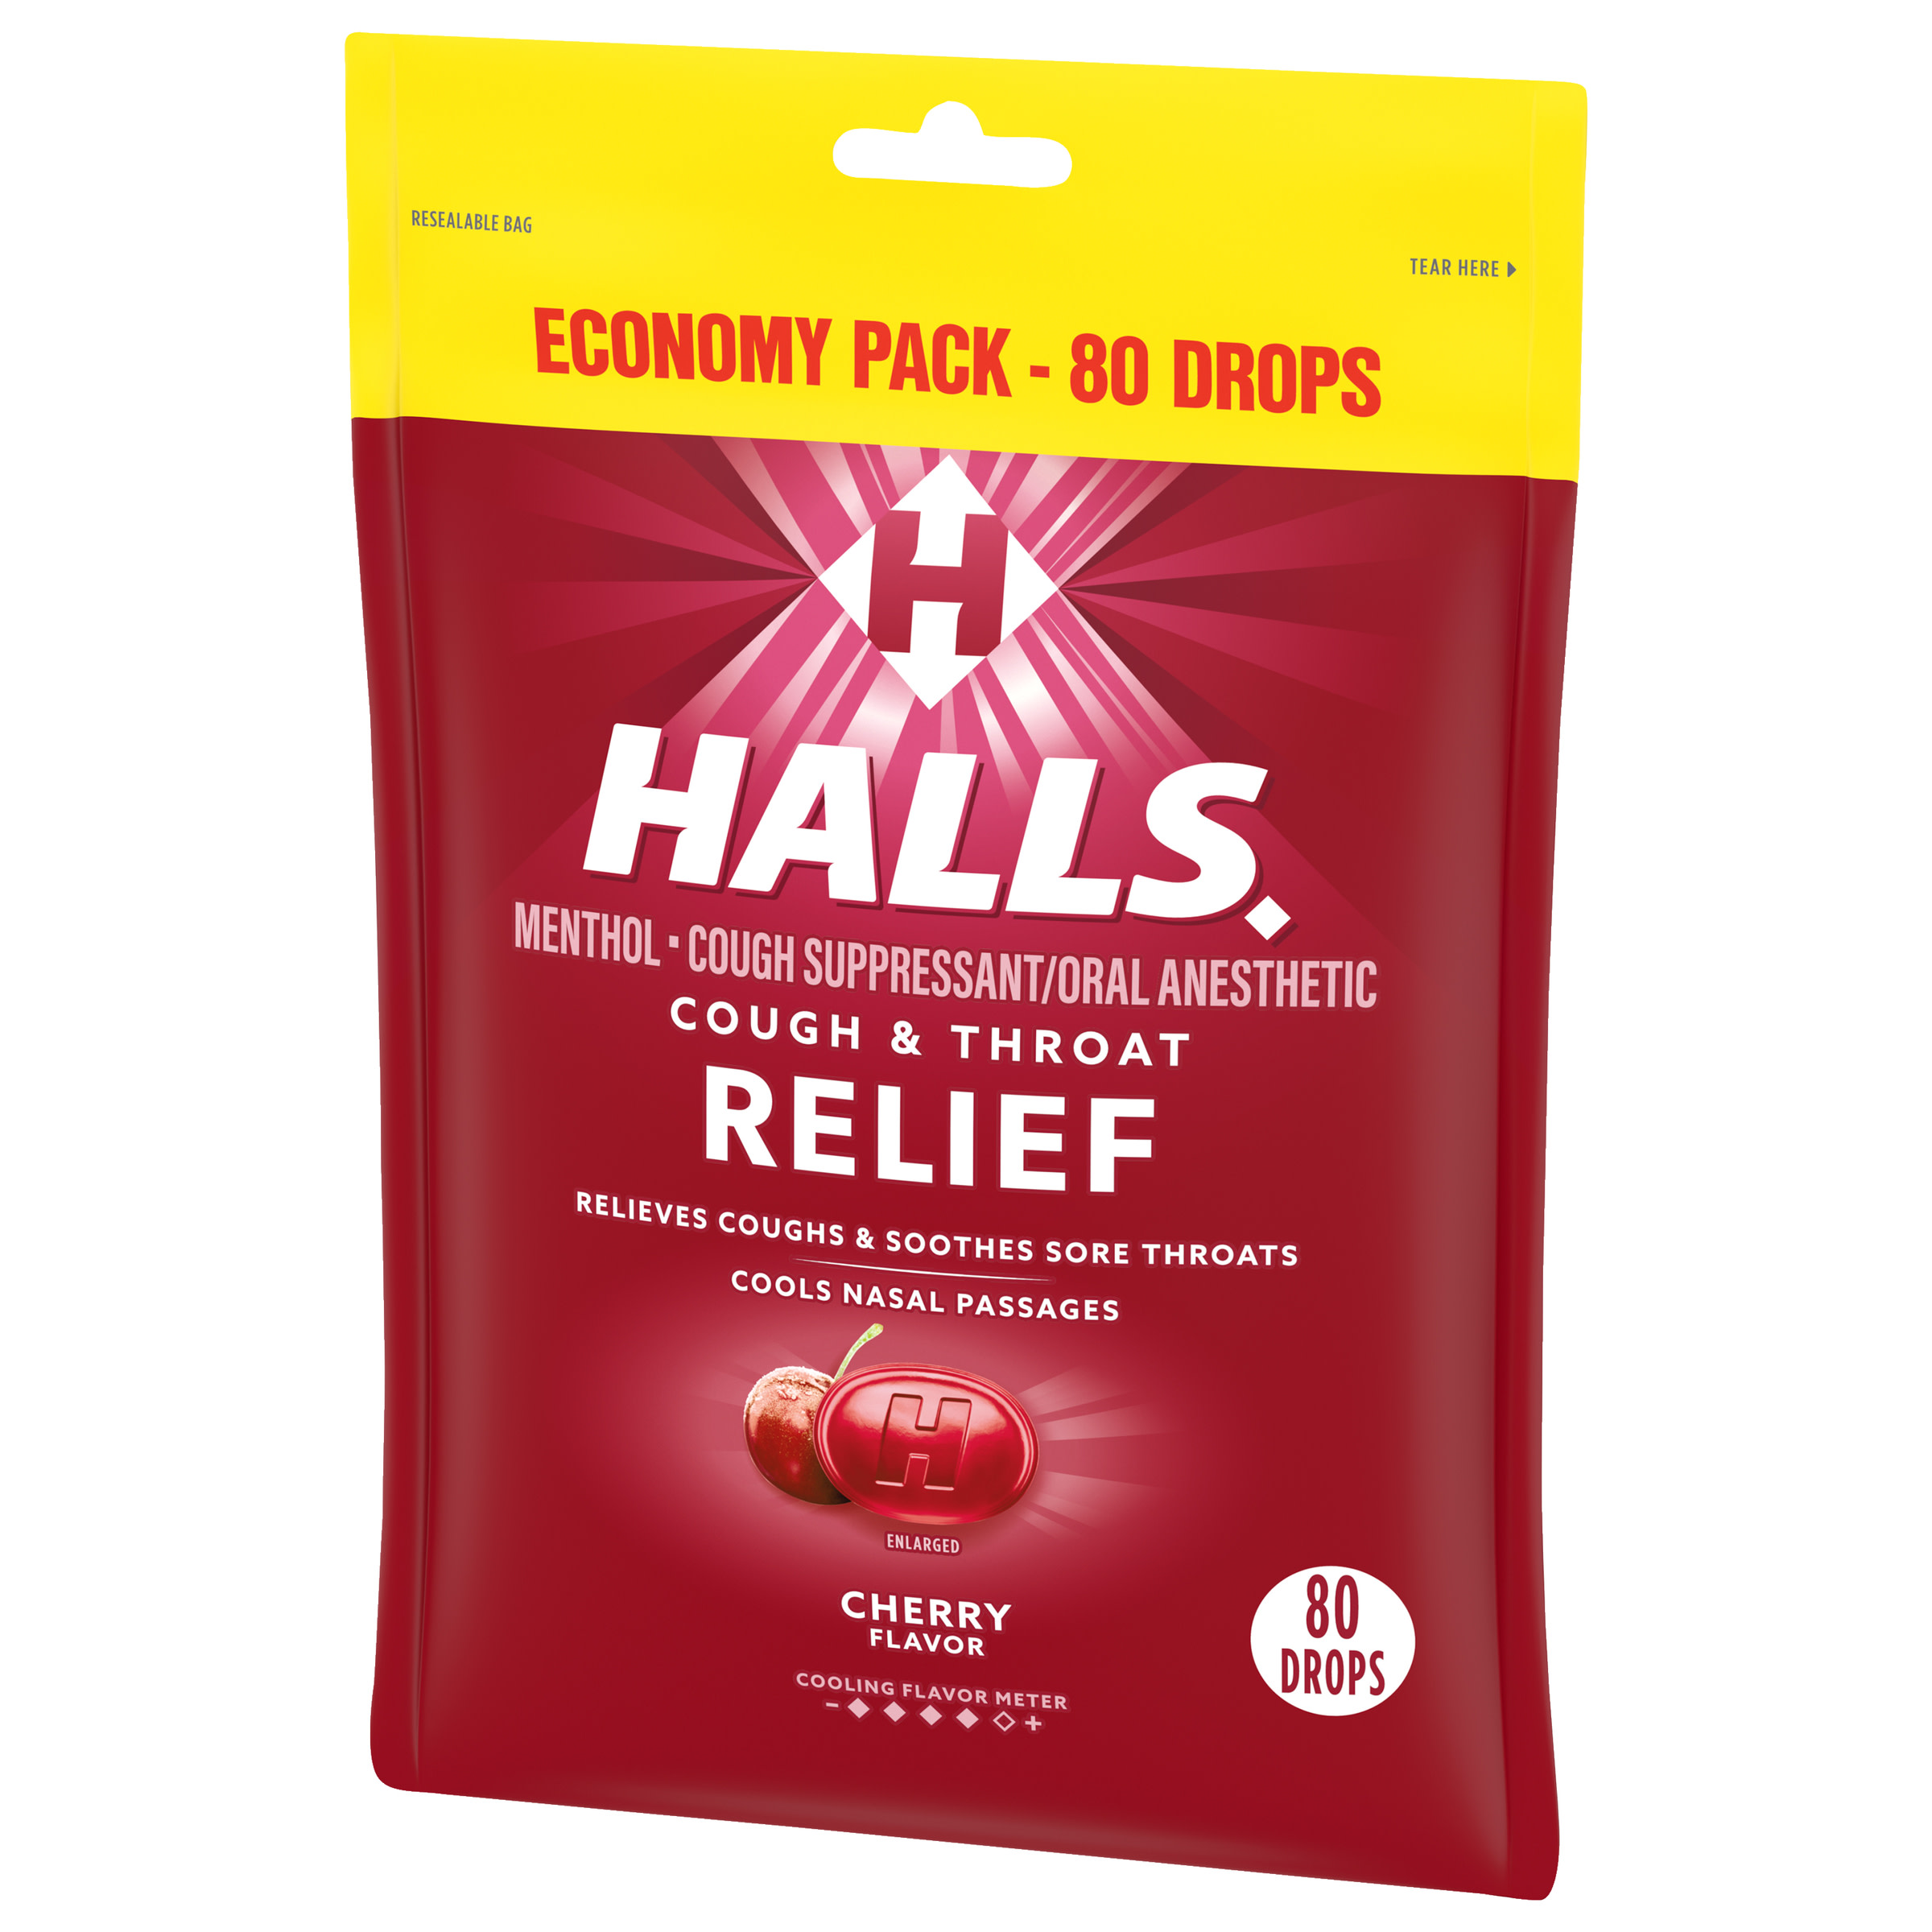 HALLS Relief Cherry Cough Drops, Economy Pack, 80 Drops - image 10 of 12